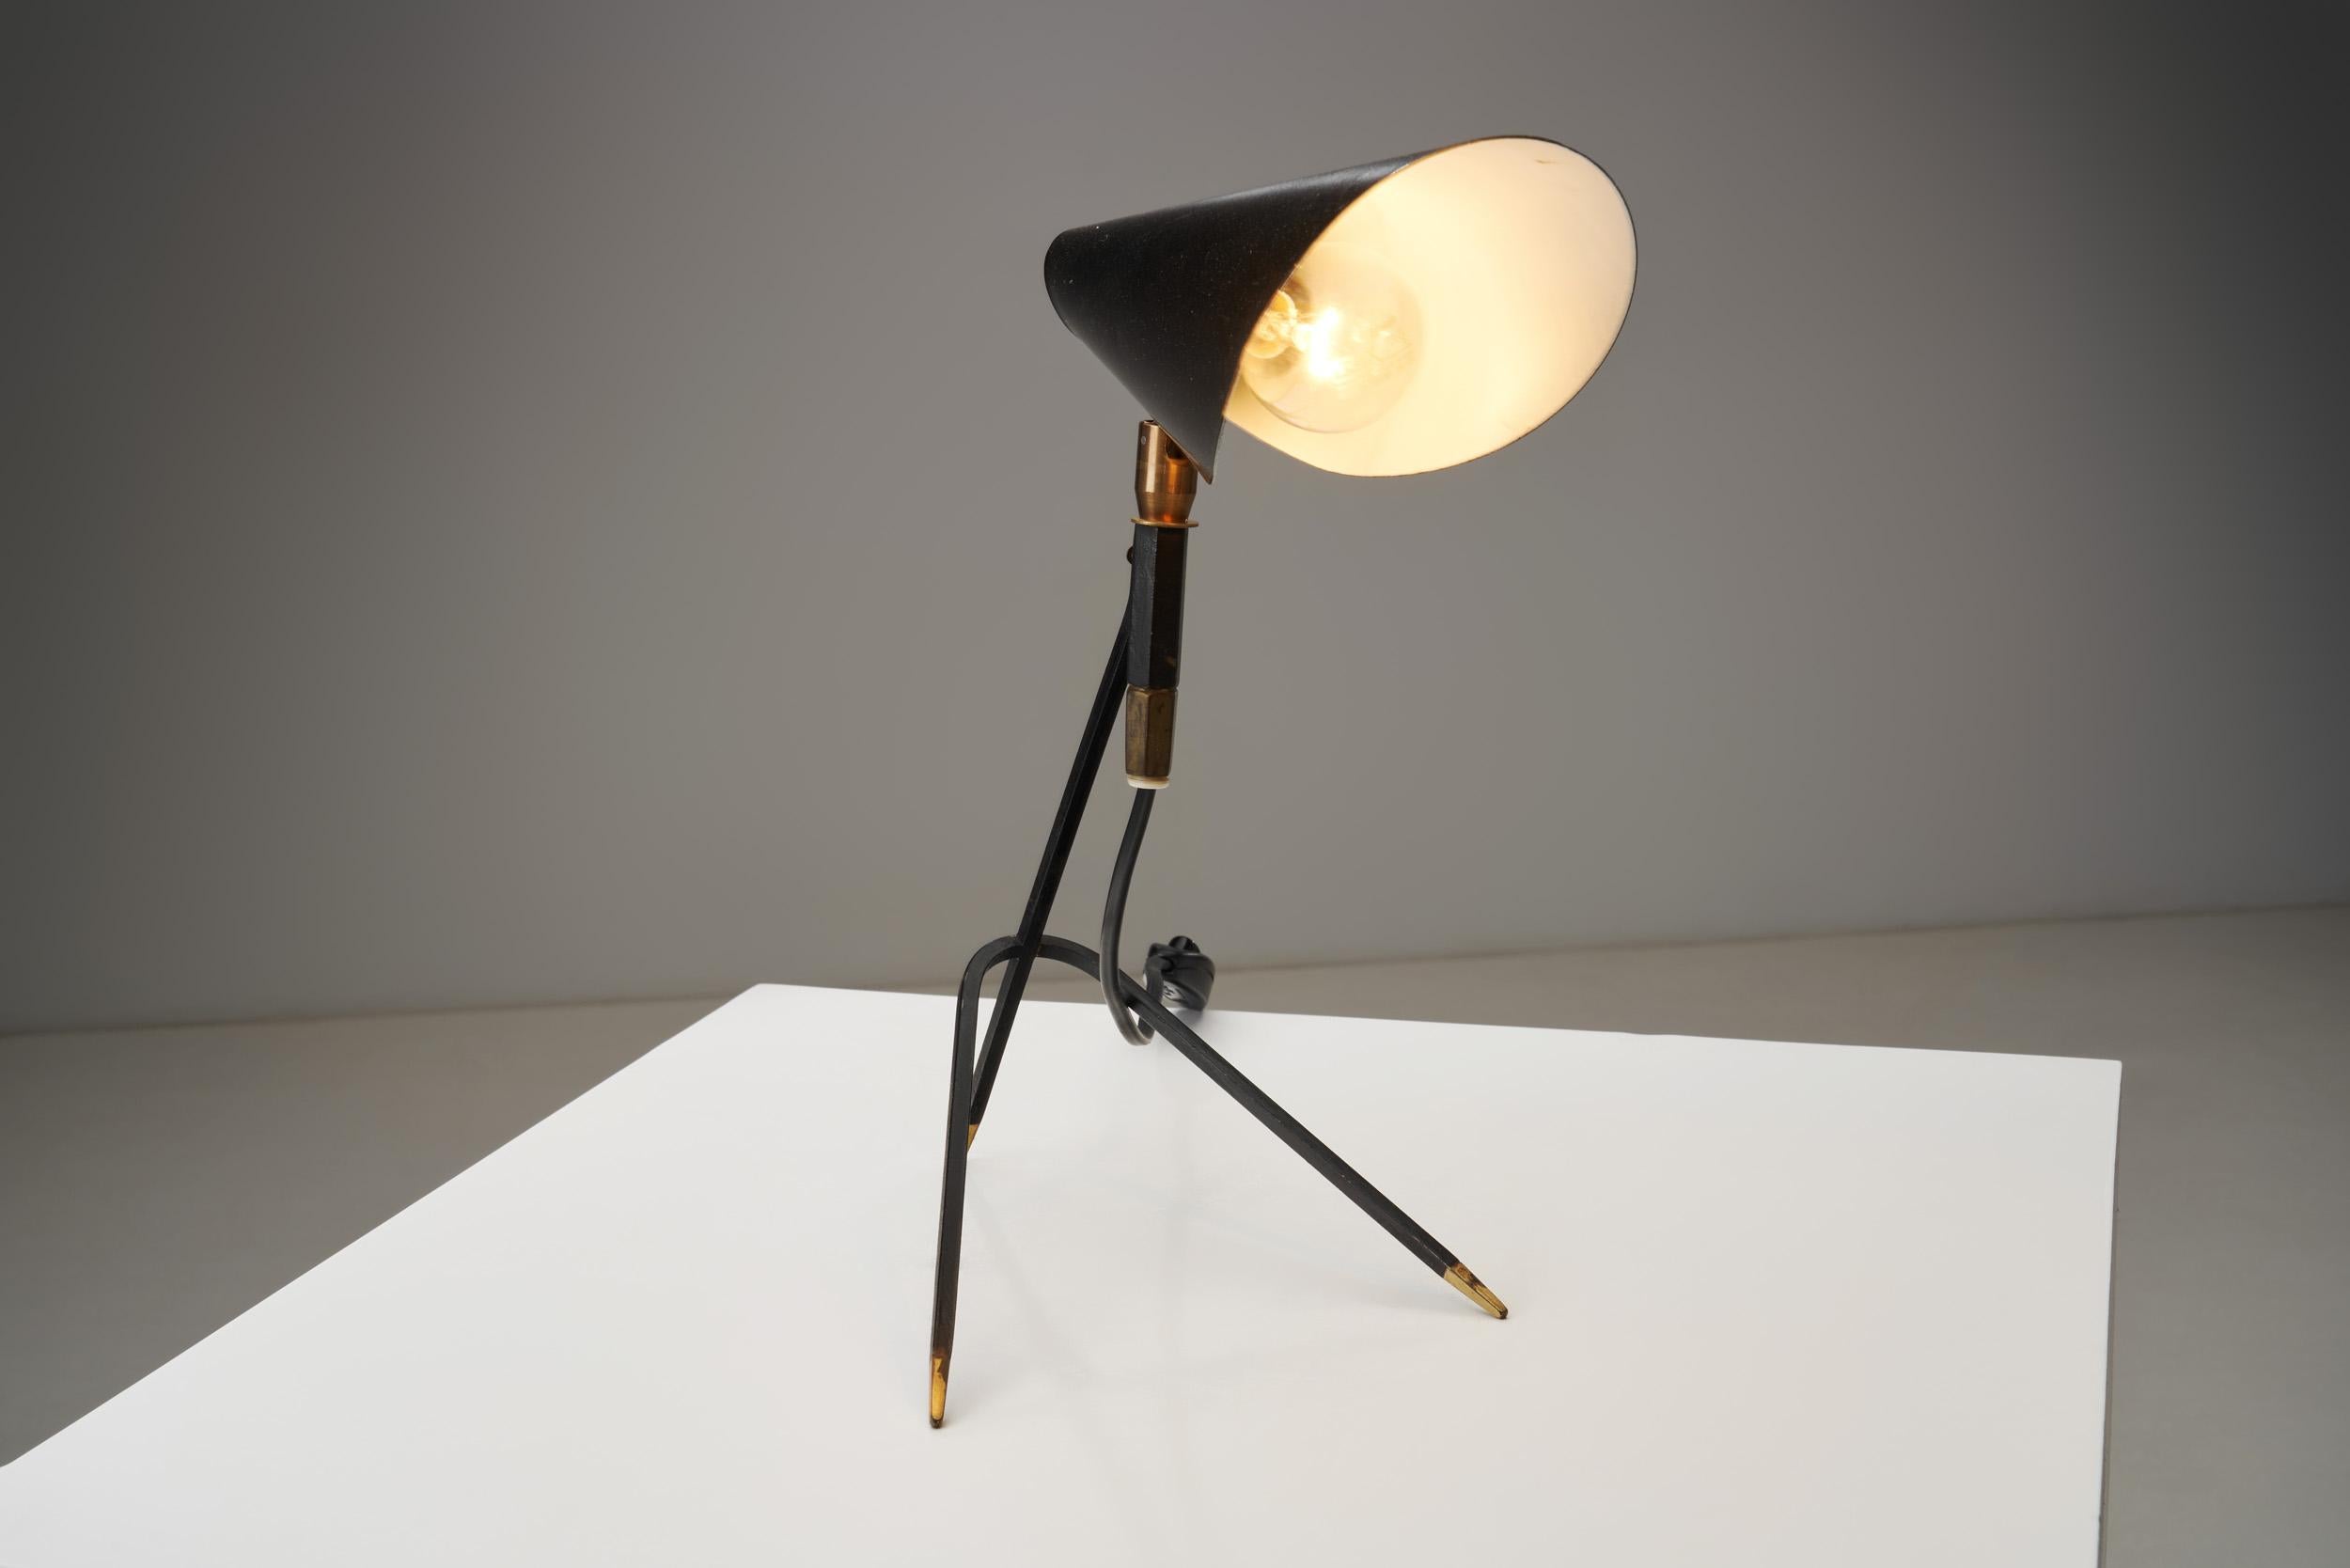 Lacquered Mid-Century Modern Table Lamp with Brass Details, Scandinavia ca 1960s For Sale 2